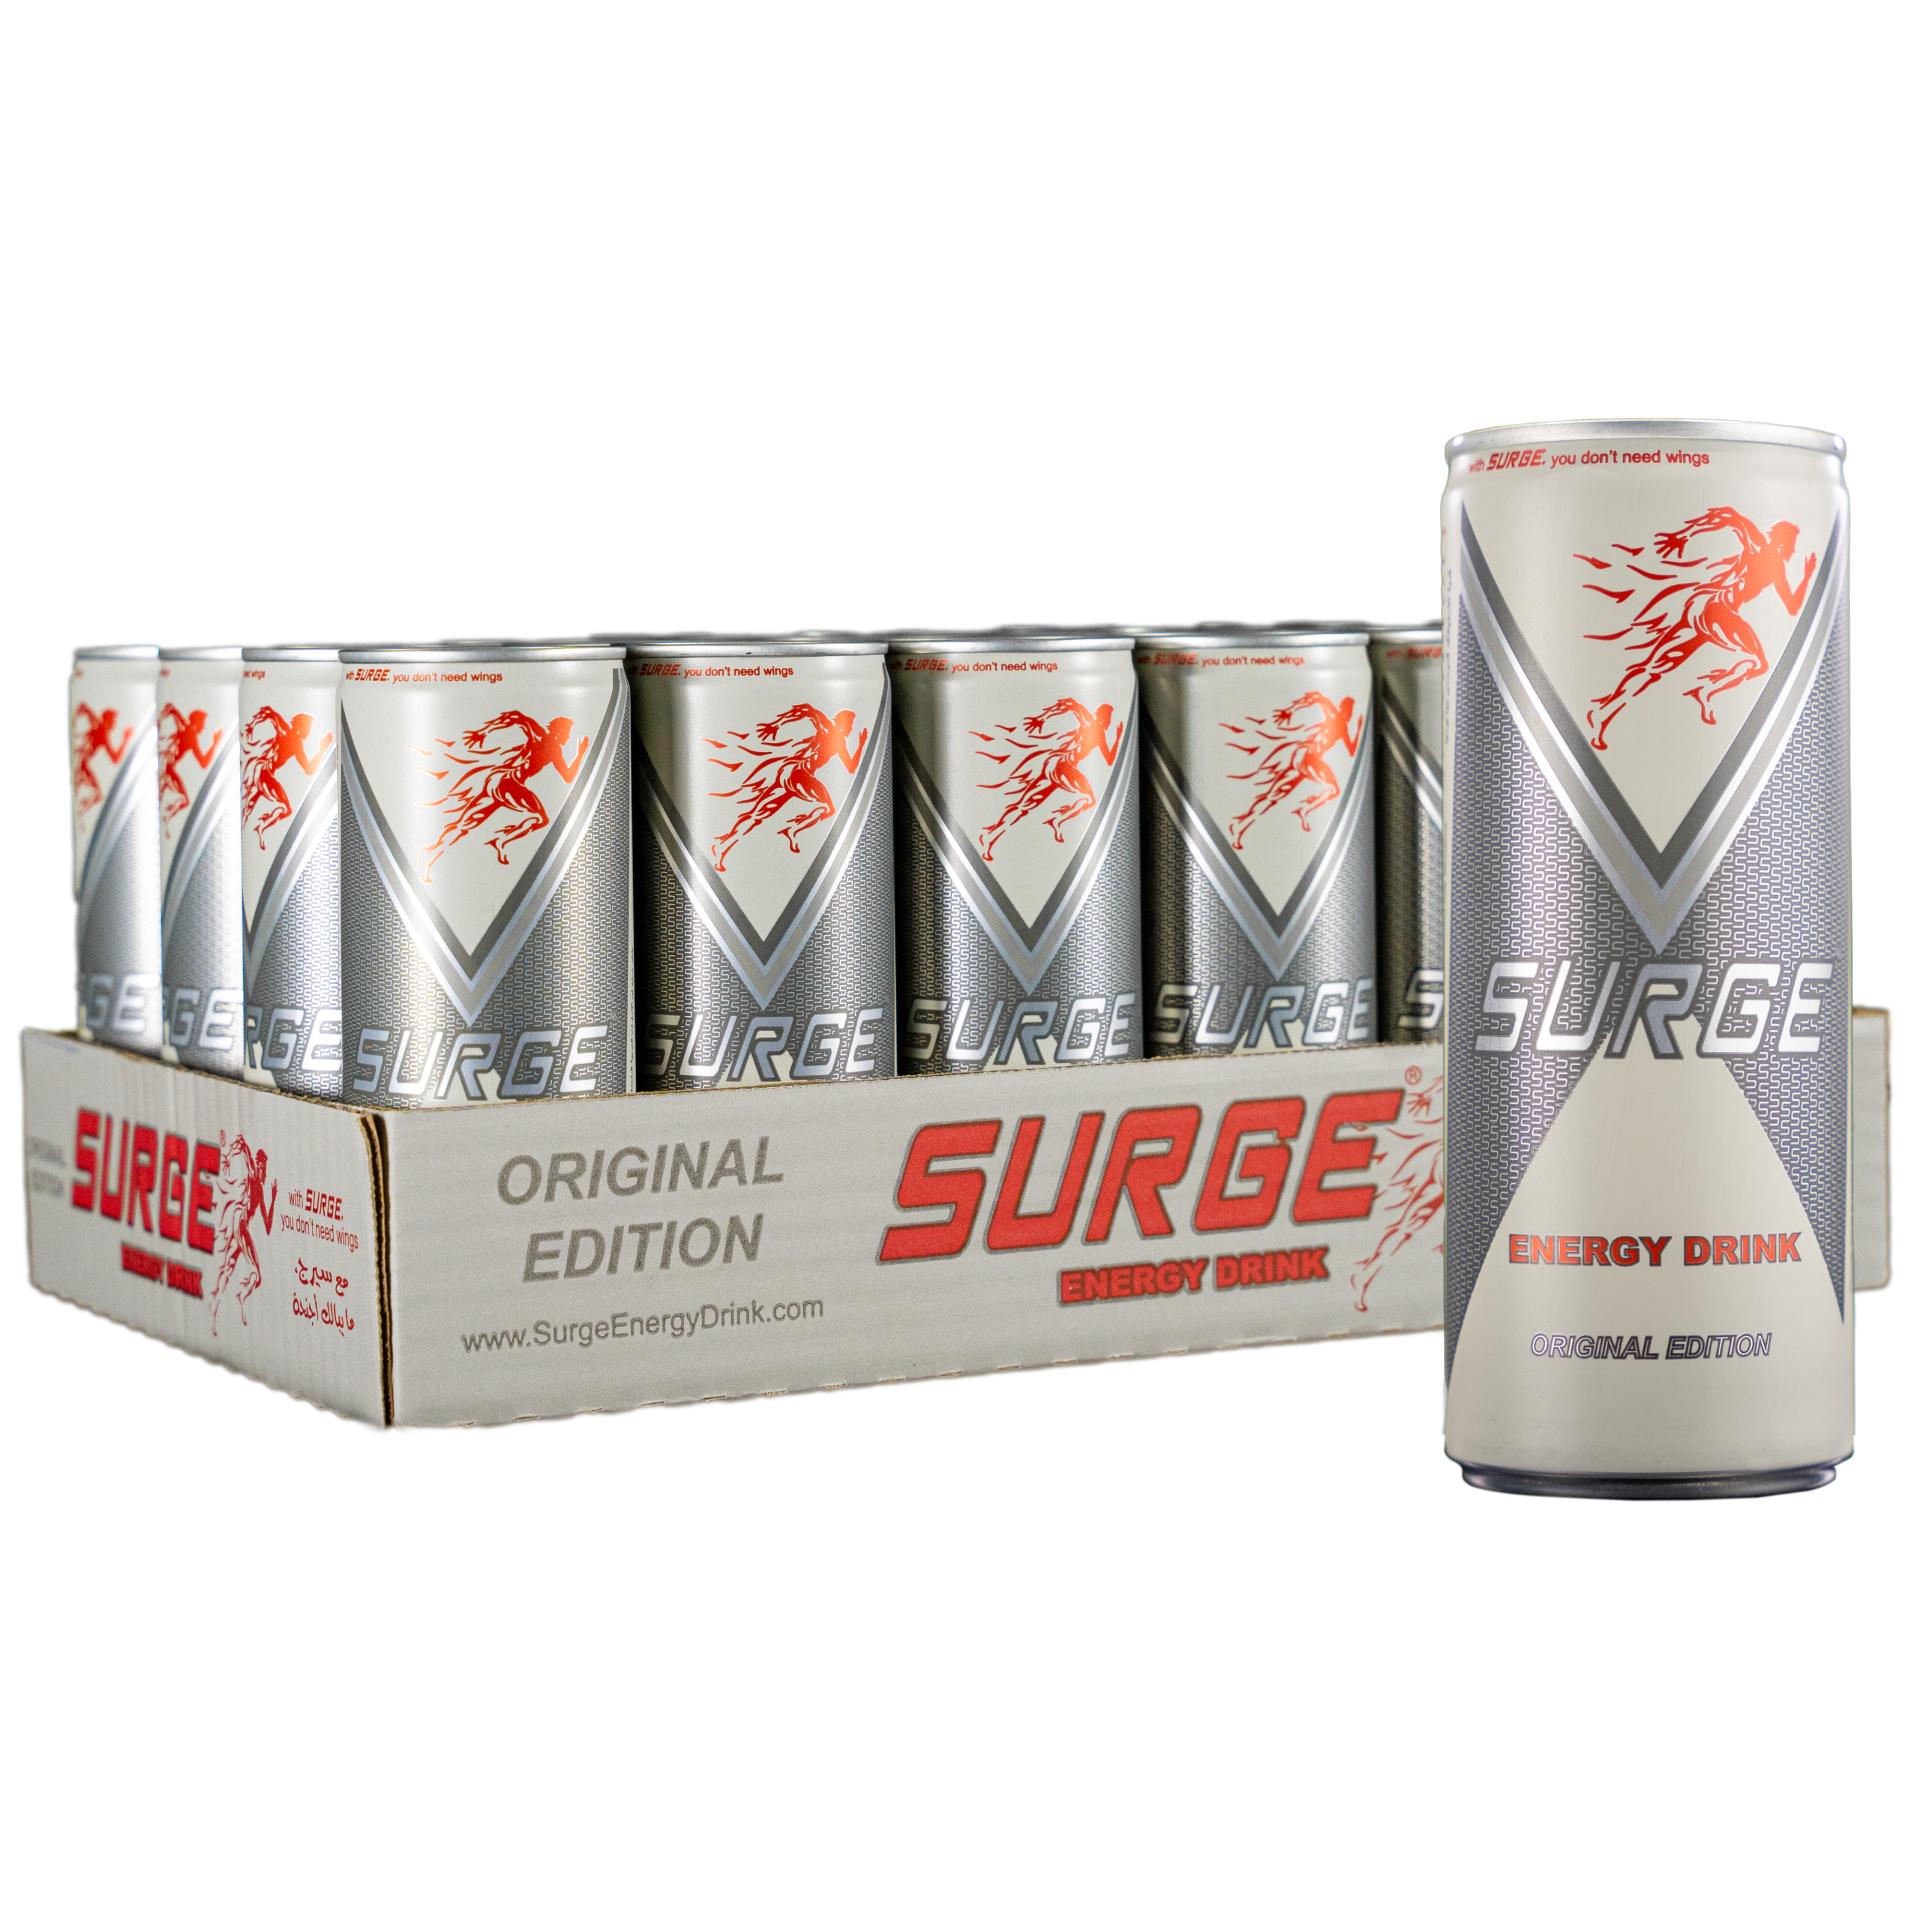 24 cans of 250ml SURGE ENERGY DRINK